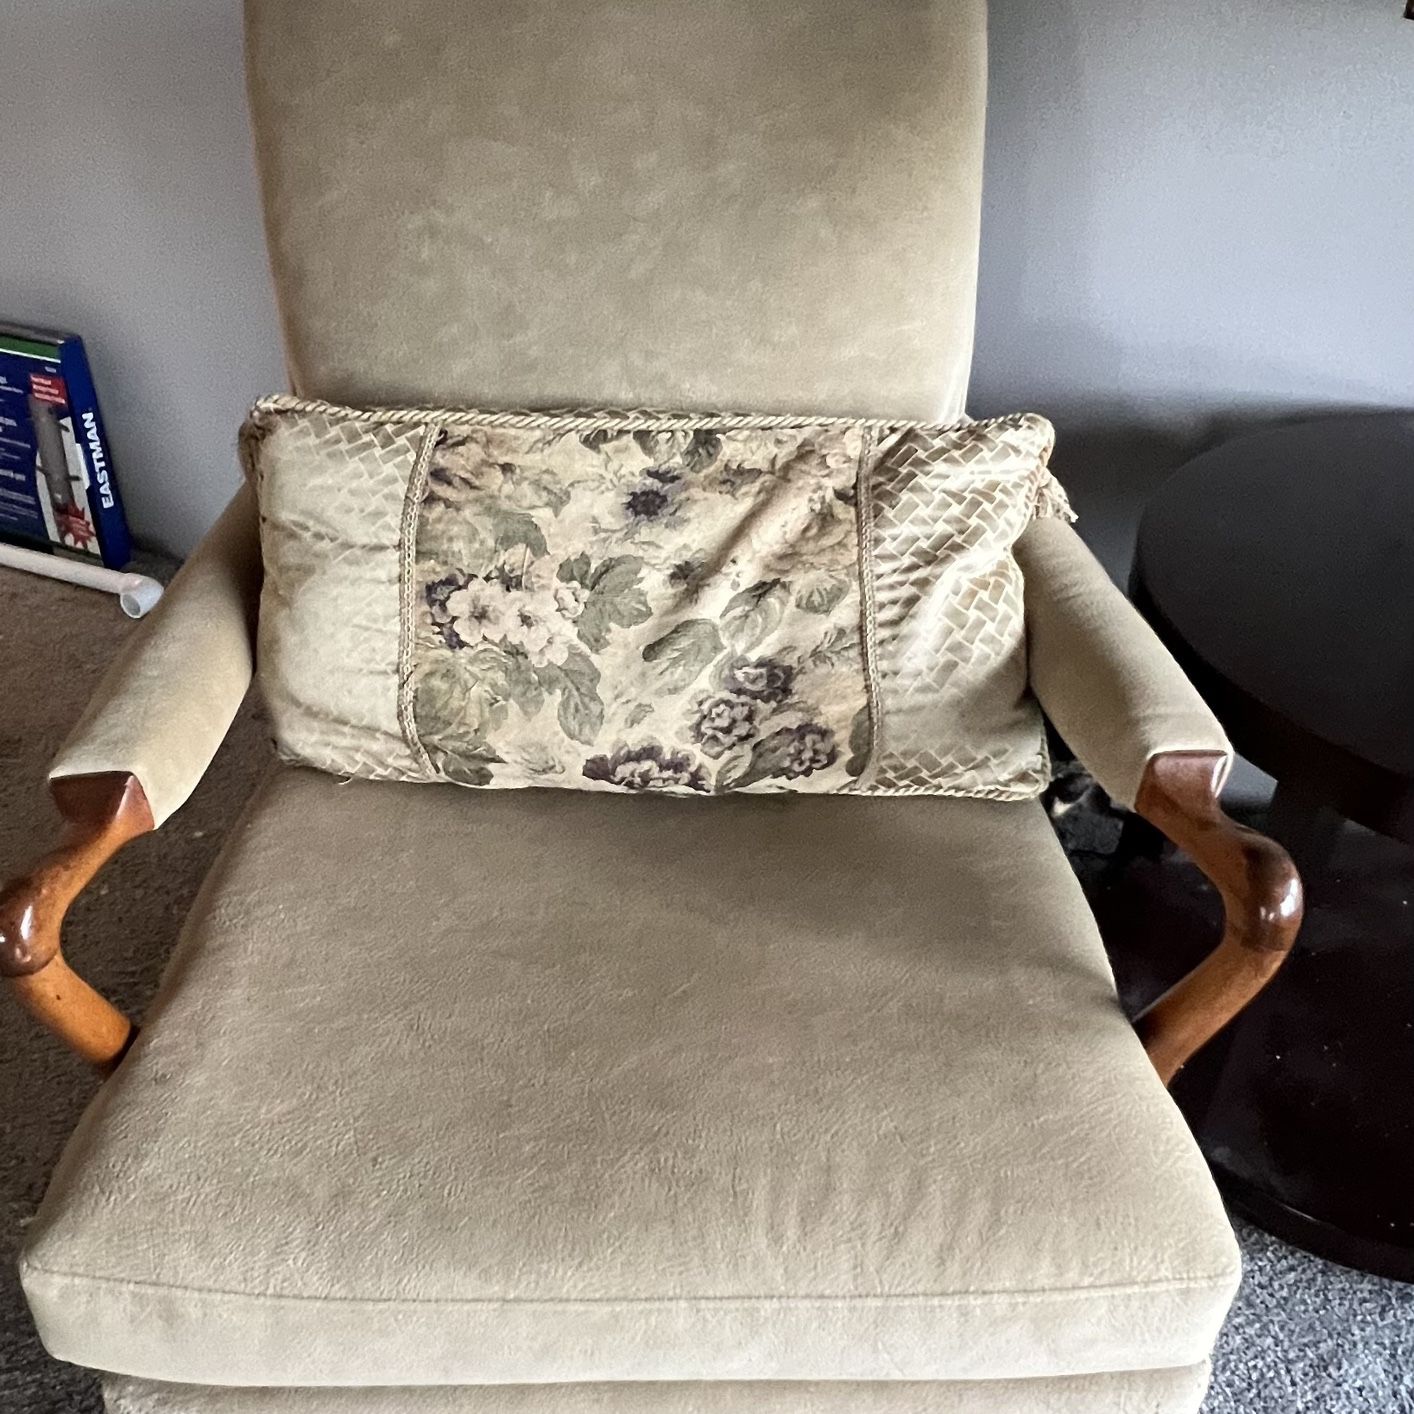 Circa 1930’s Chair - Reupholstered